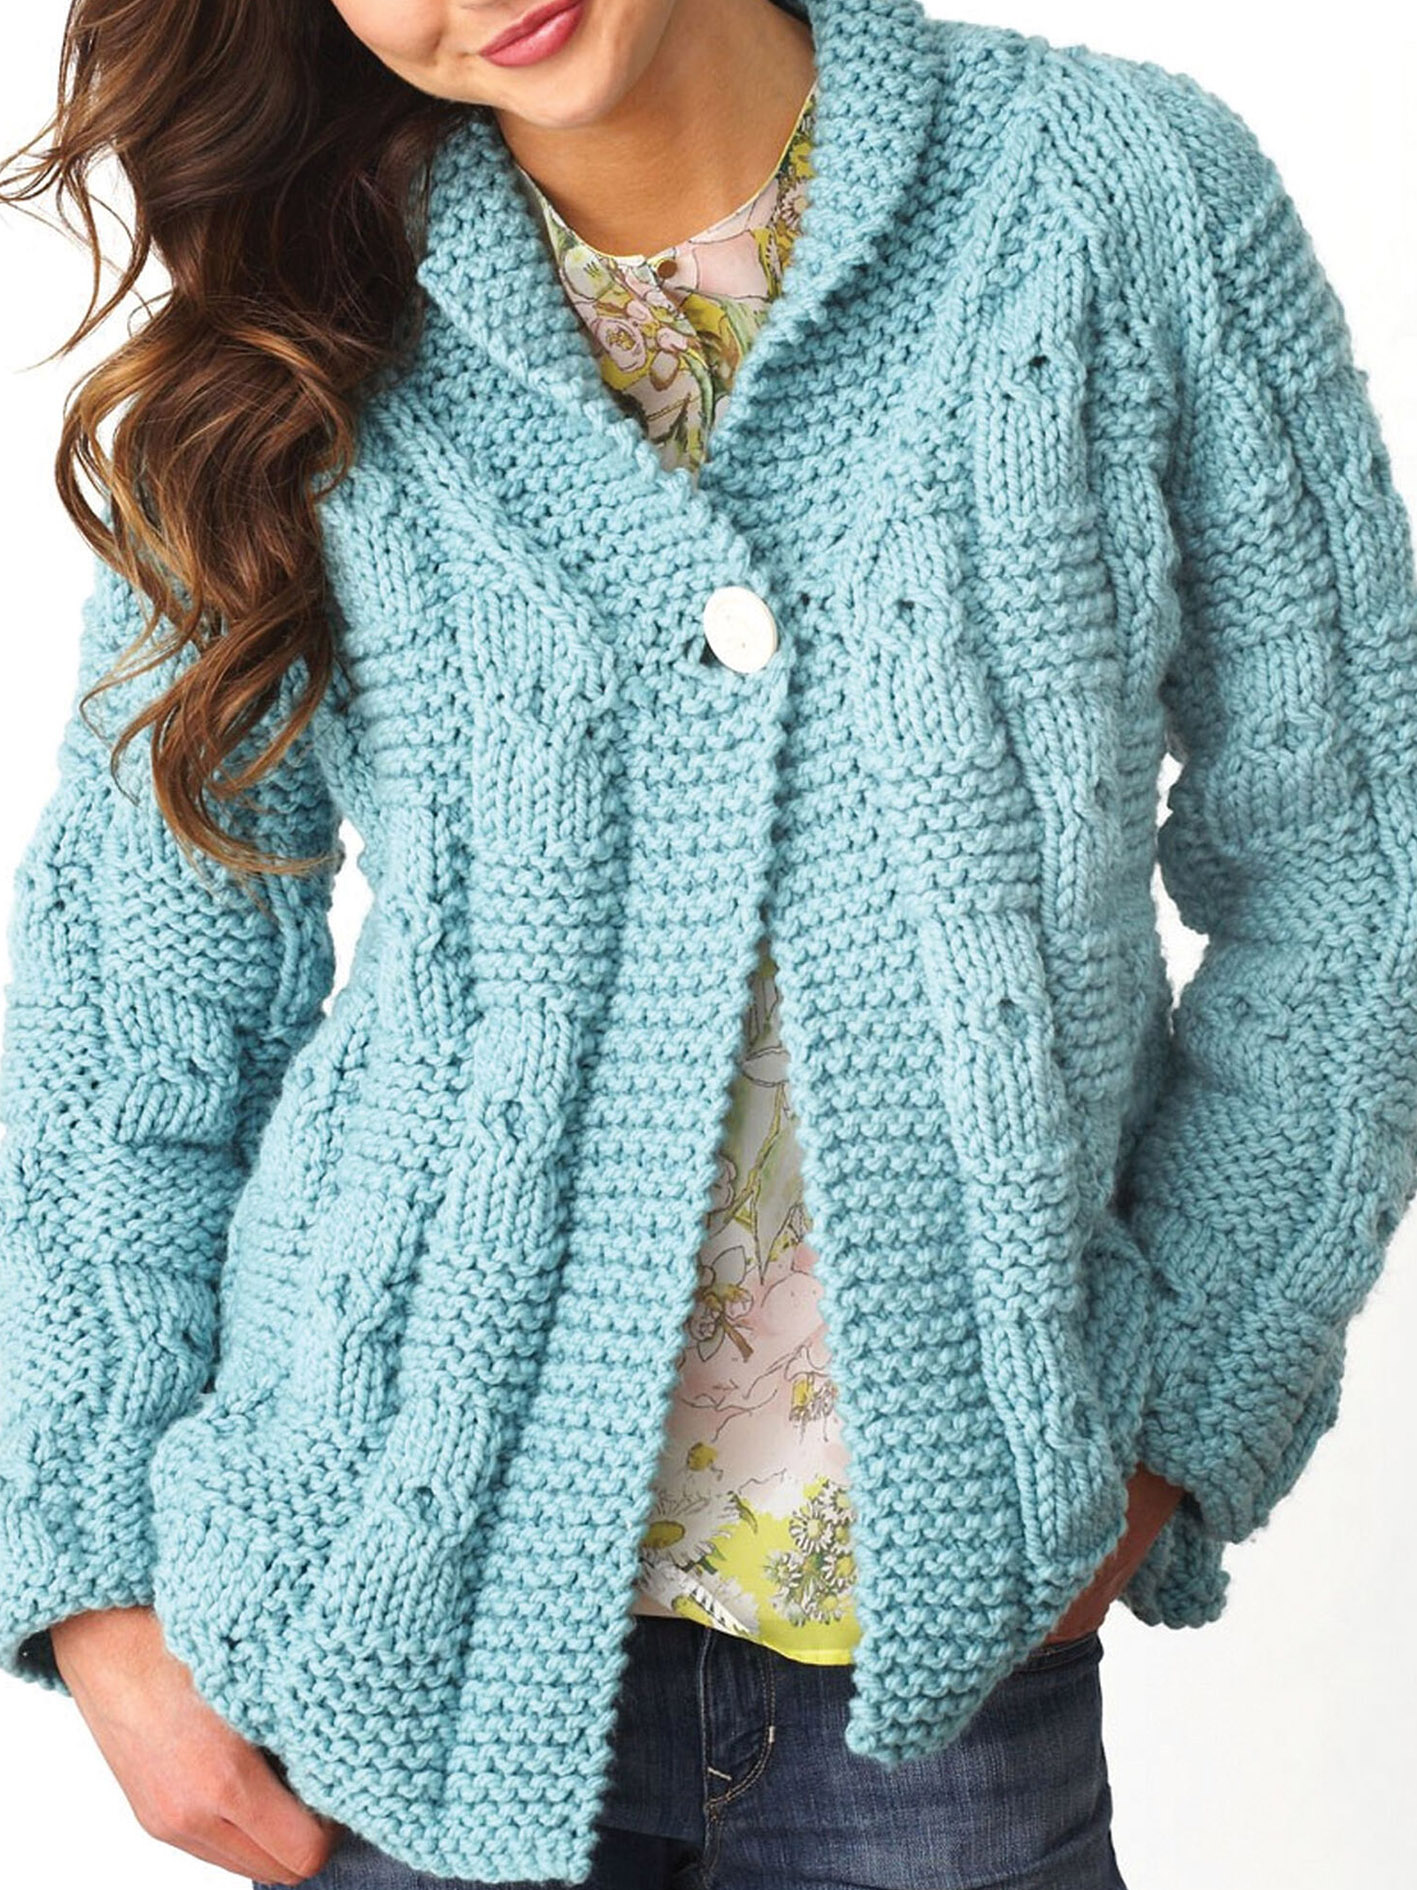 Most Popular Free Crochet Cardigan Patterns For Women 2021 - Page 24 of